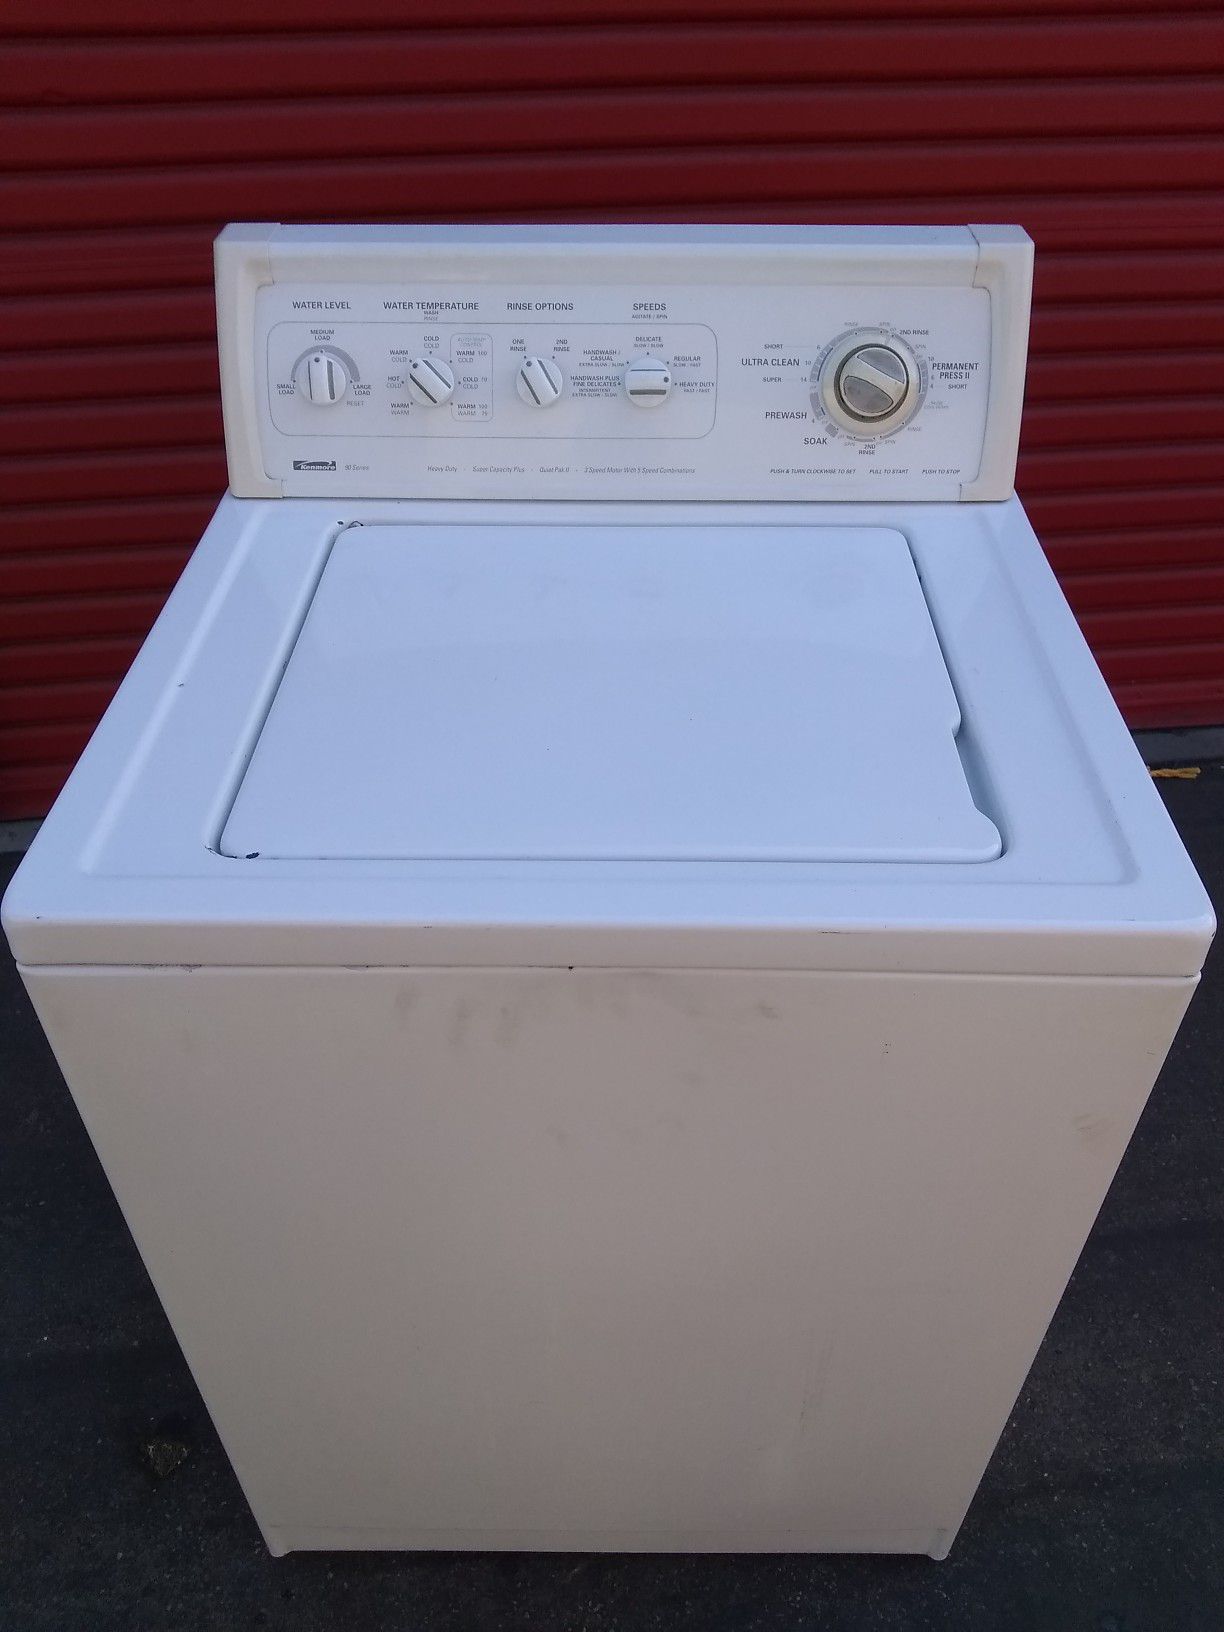 Washer Kenmore 90 days warranty deliver free